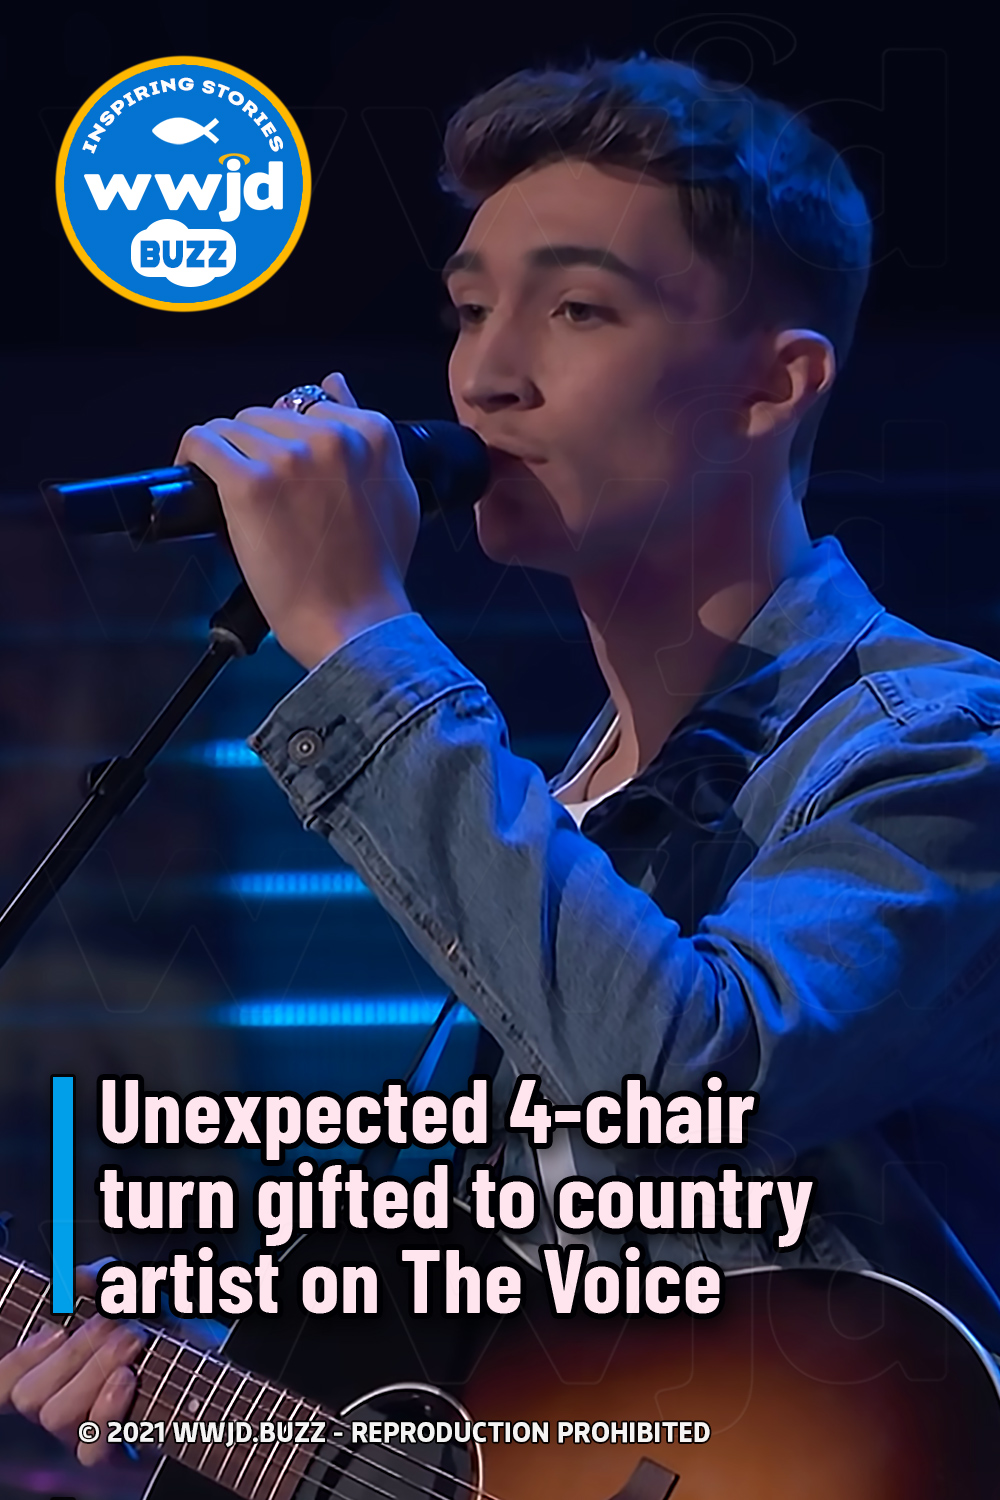 Unexpected 4-chair turn gifted to country artist on The Voice